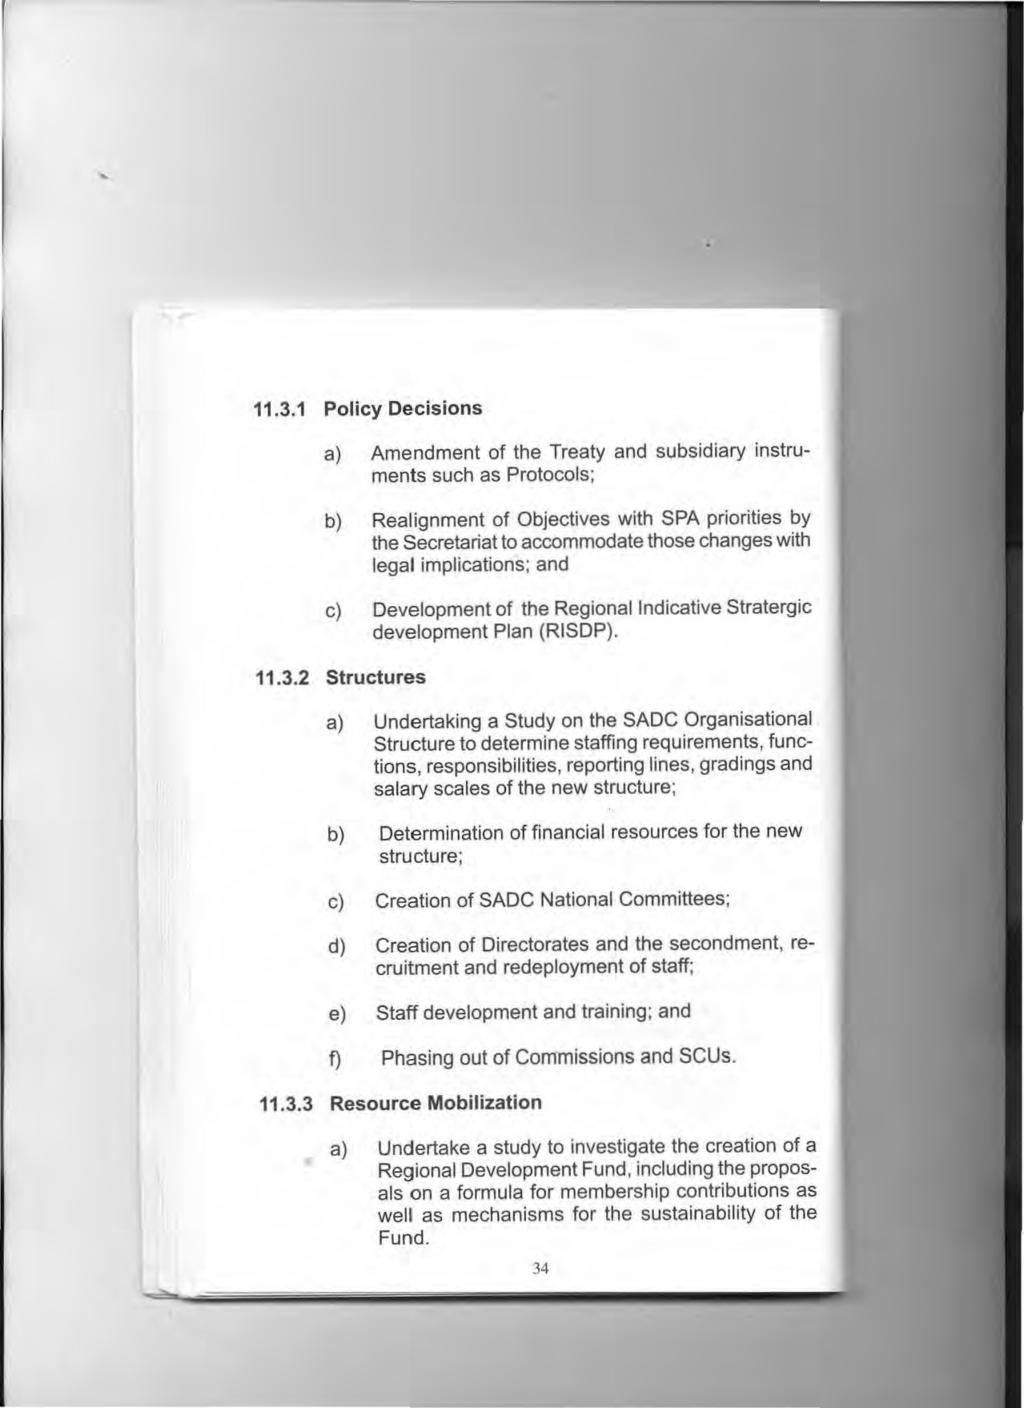 11.3.1 Policy Decisions a) Amendment of the Treaty and subsidiary instruments such as Protocols; b) Realignment of Objectives with SPA priorities by the Secretariat to accommodate those changes with